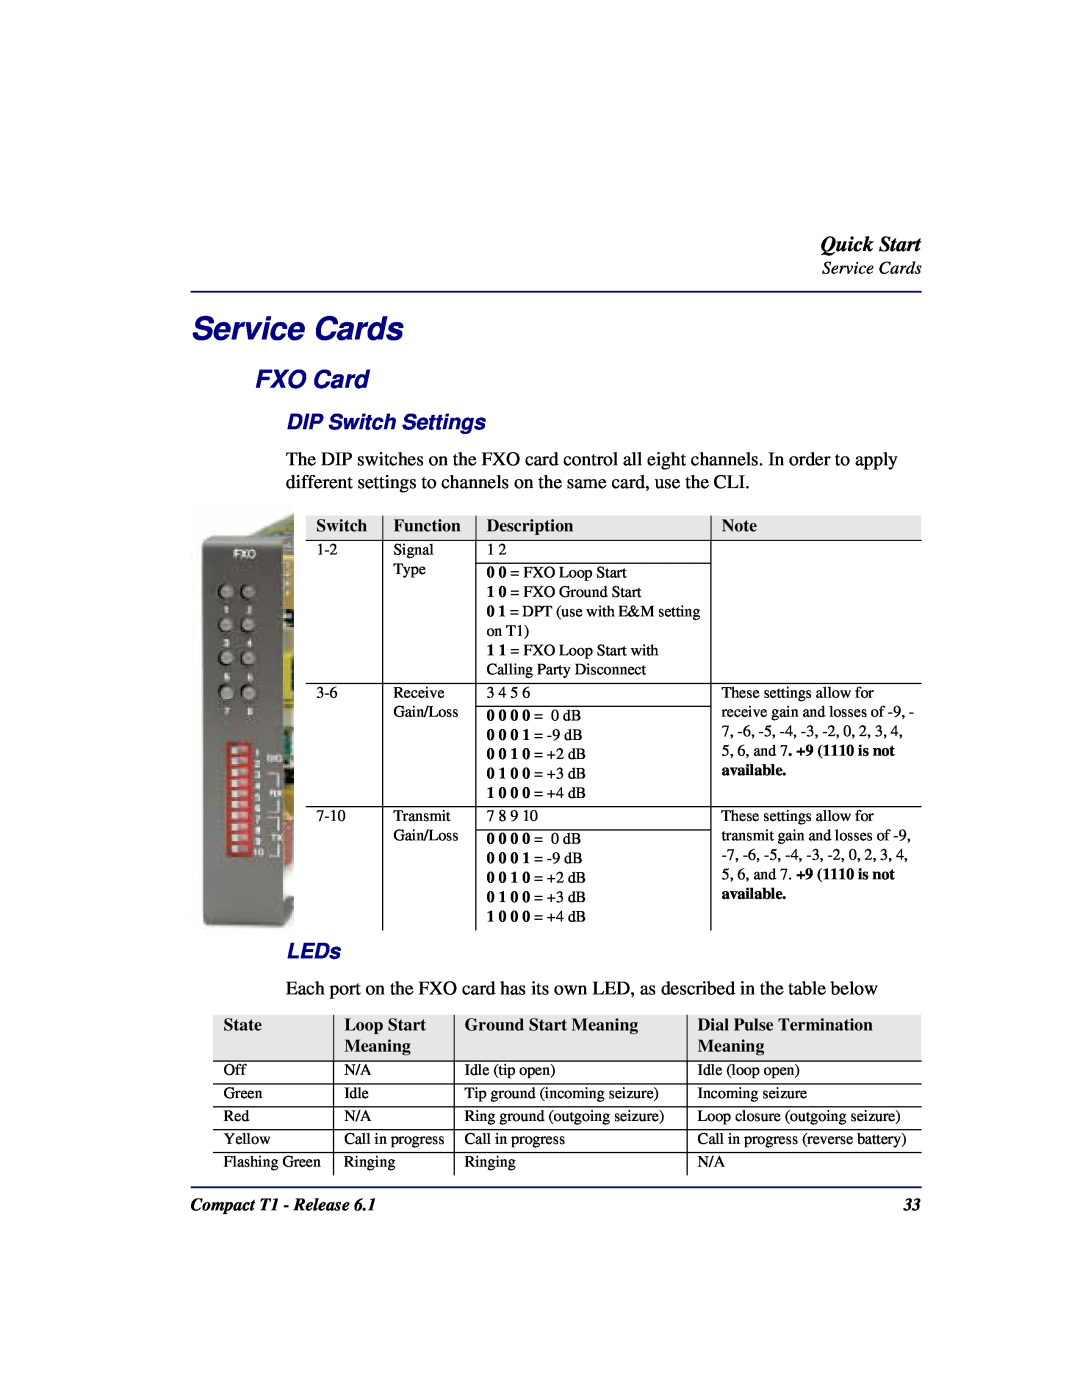 Black Box COMPACT T1 quick start Service Cards, FXO Card, Quick Start 